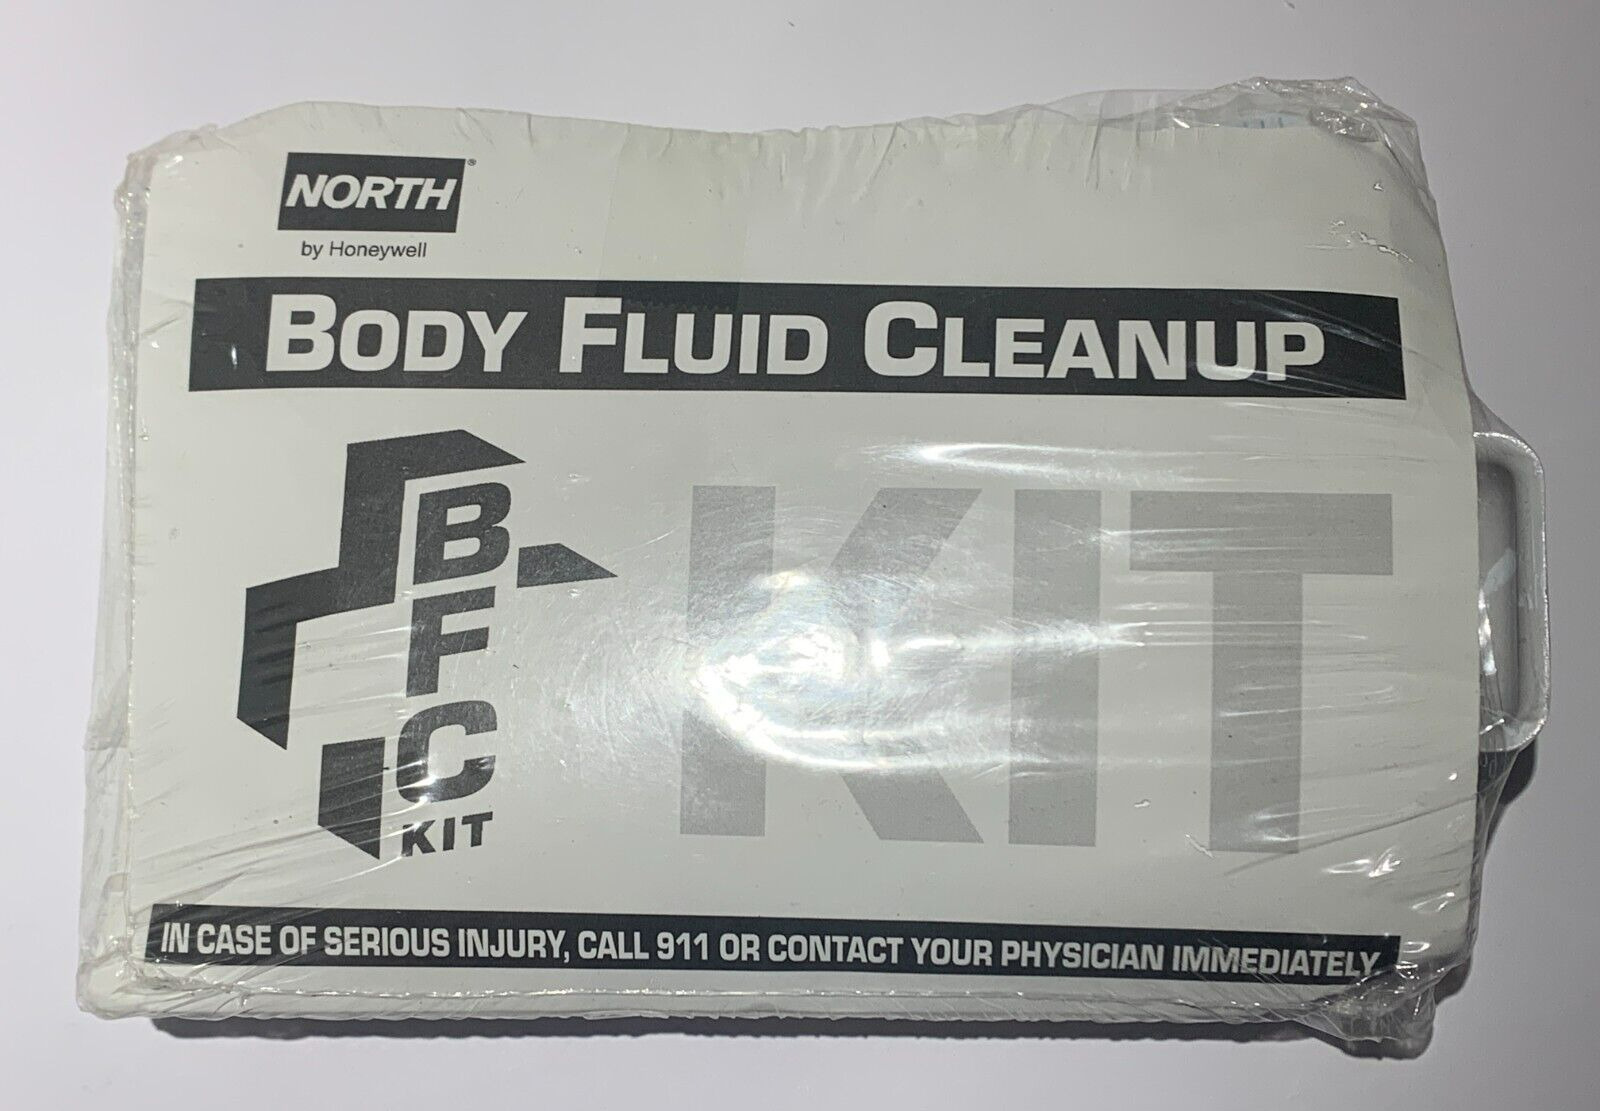 North by Honeywell 552001 Body Fluid Cleanup BFC Kit sealed